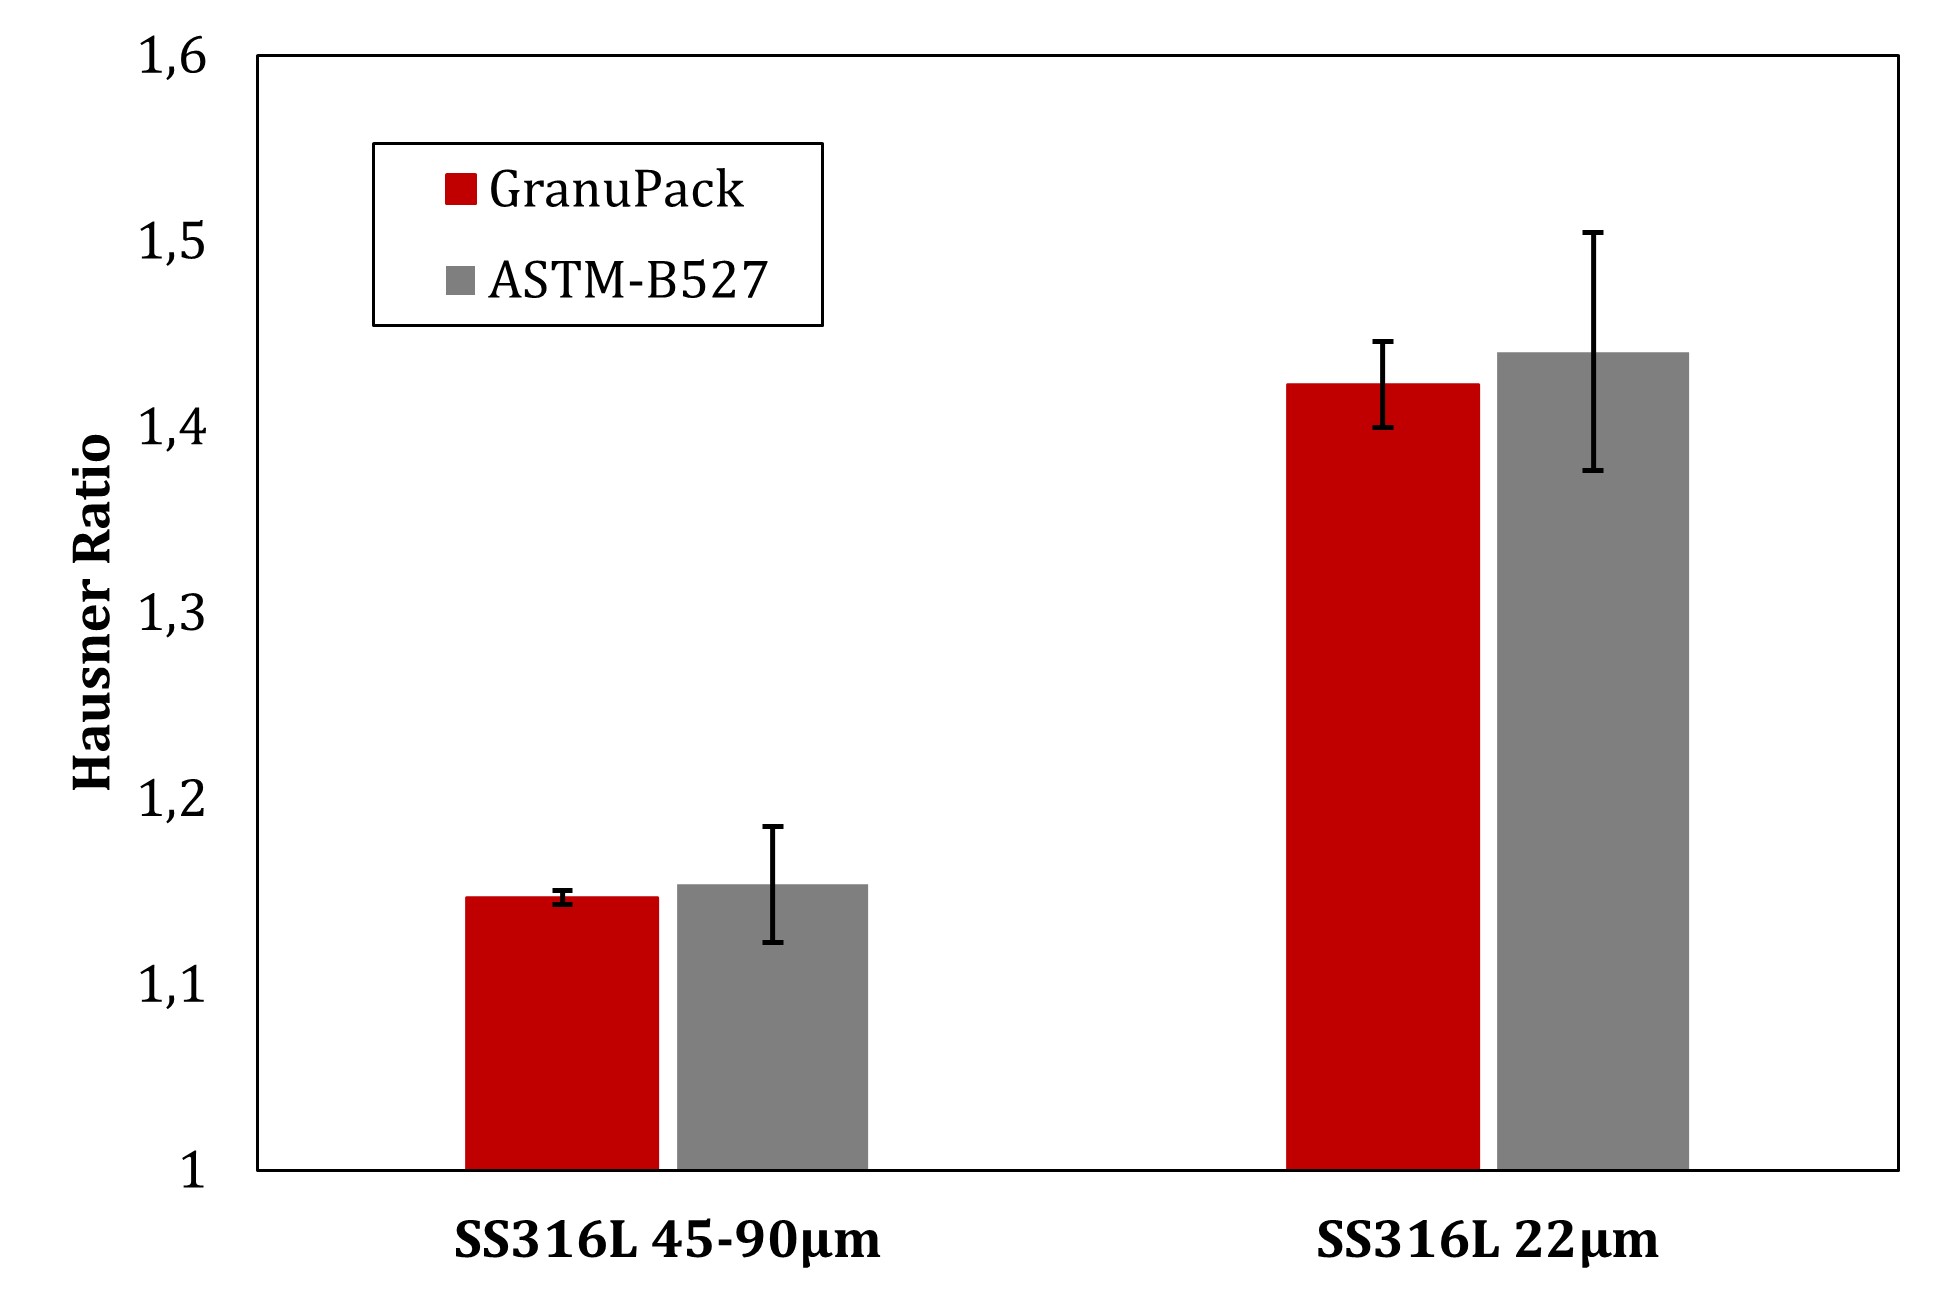 Hausner ratio measured with the GranuPack Classic and the standardized ASTM B527 procedures on both metal powders. Error bars are standard deviations around the mean computed over three independent tests.